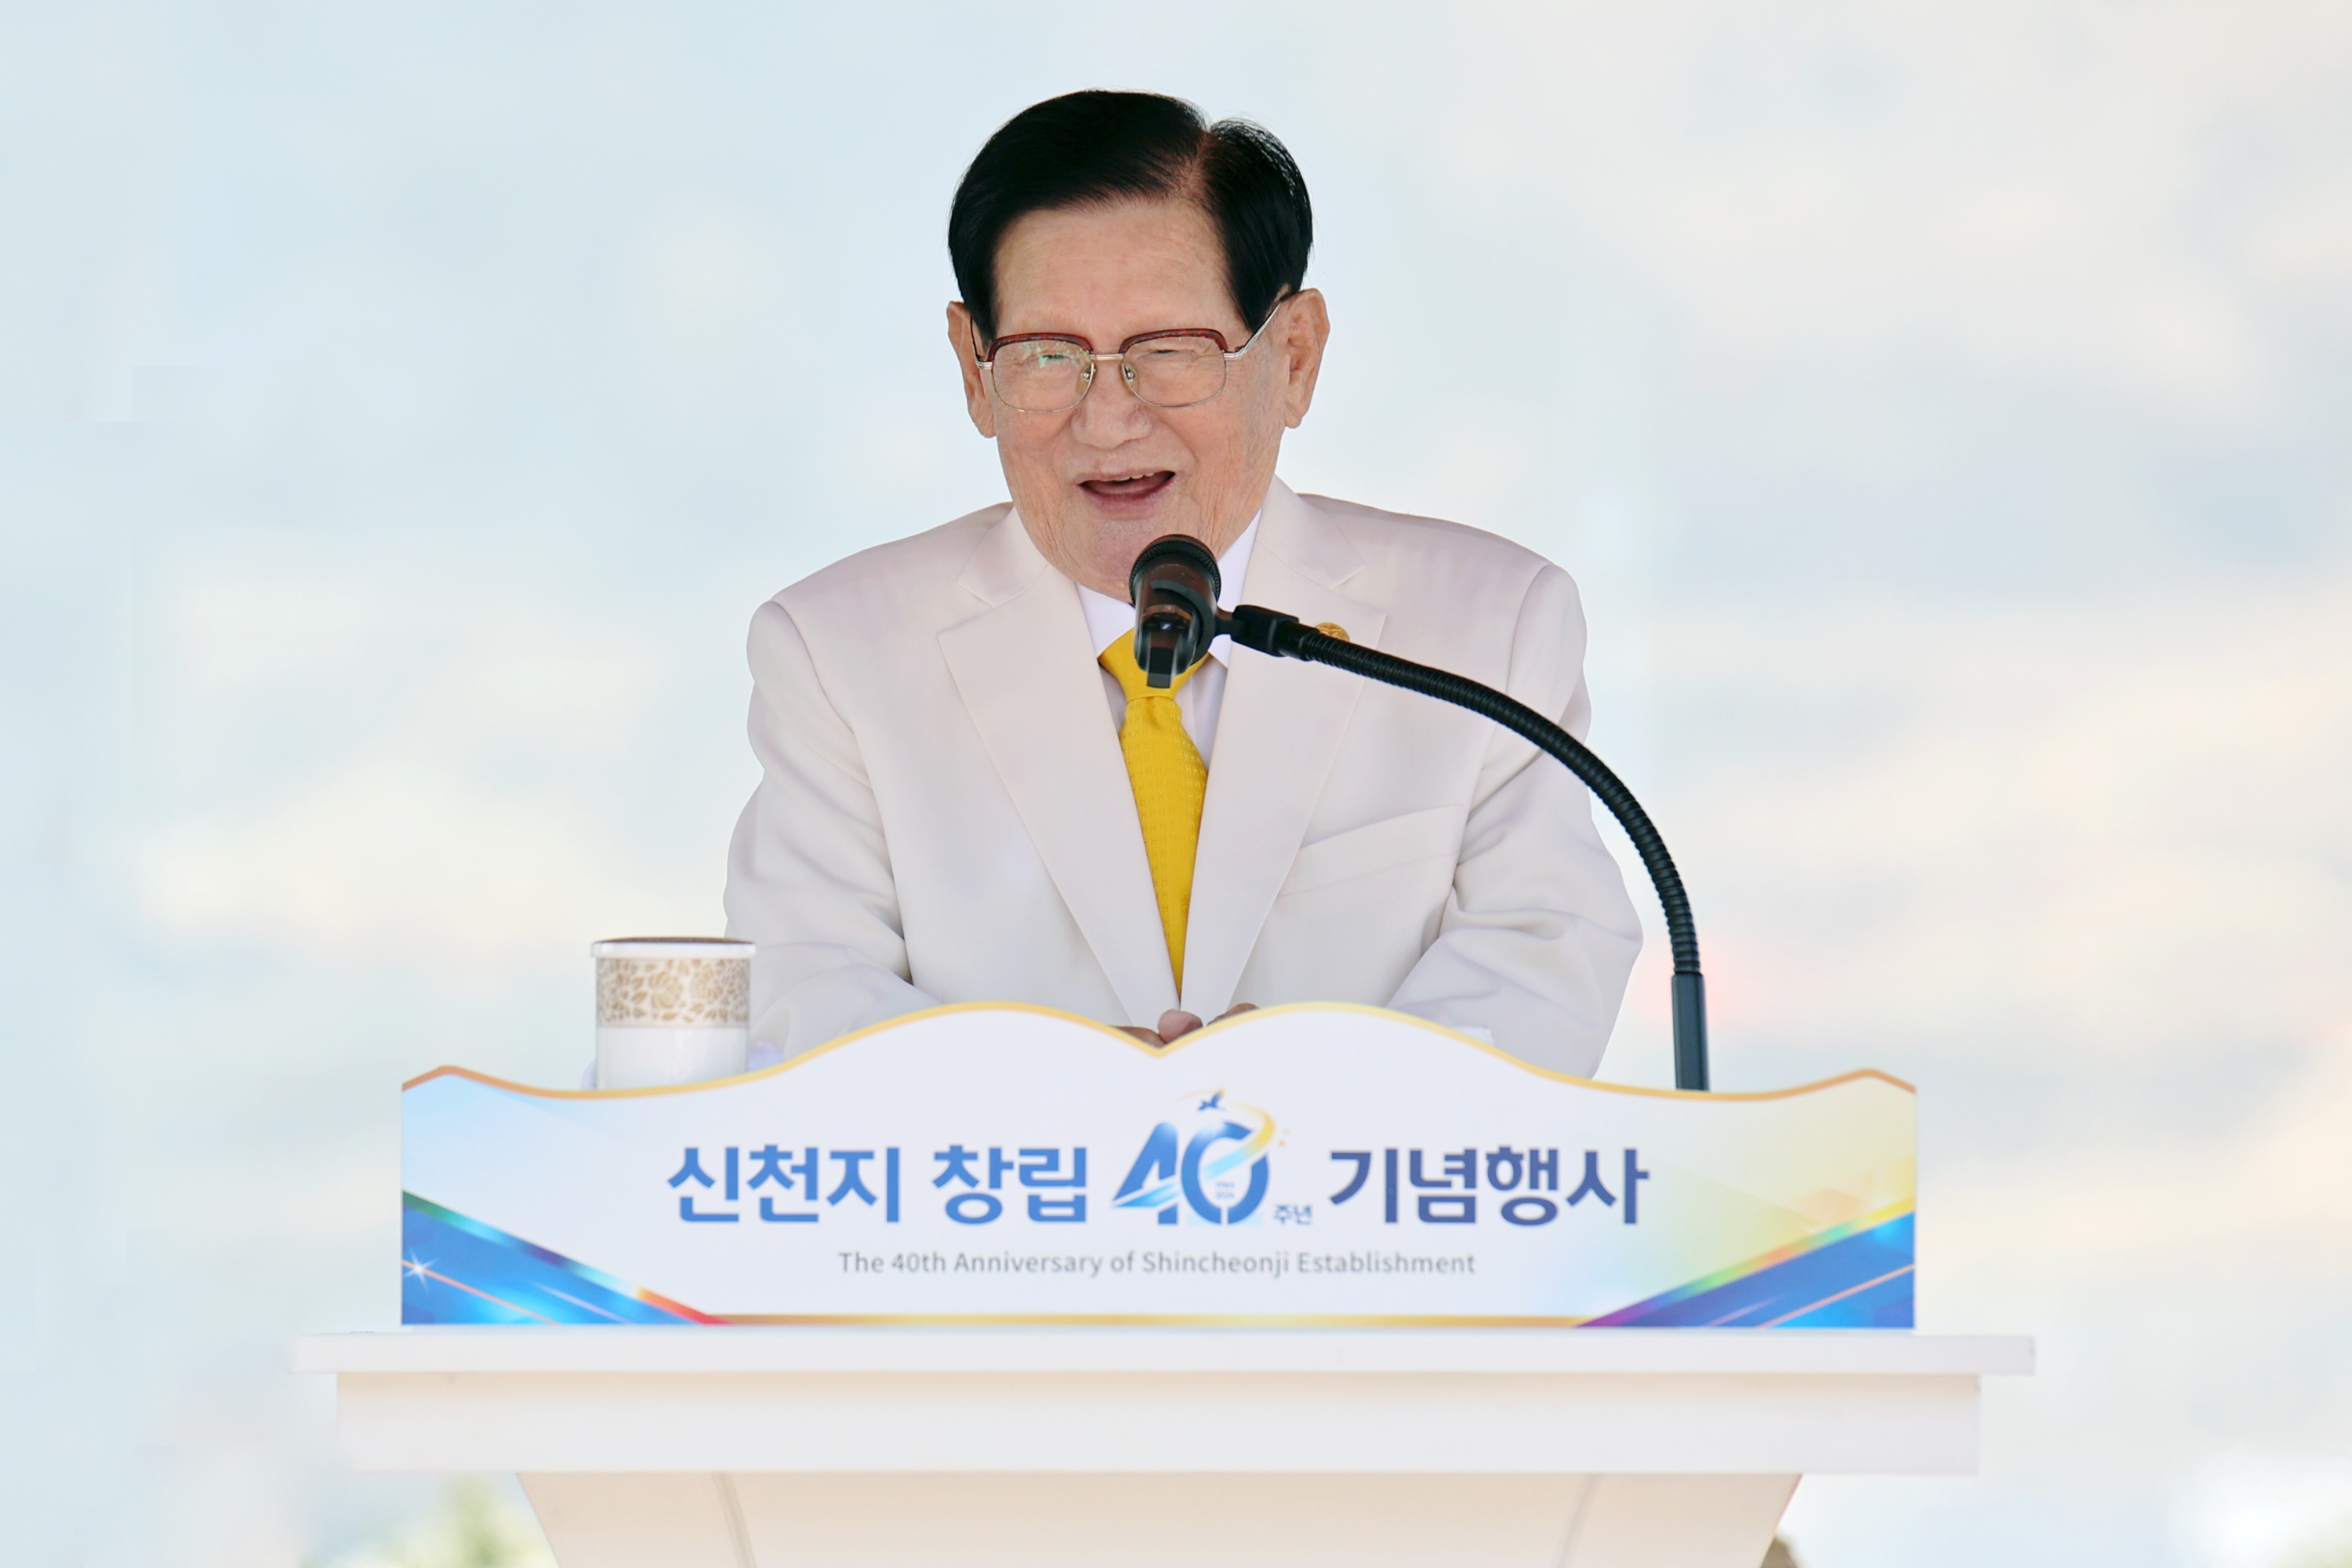 Chairman of Shincheonji Man Hee Lee delivers some words during the 40th Anniversary